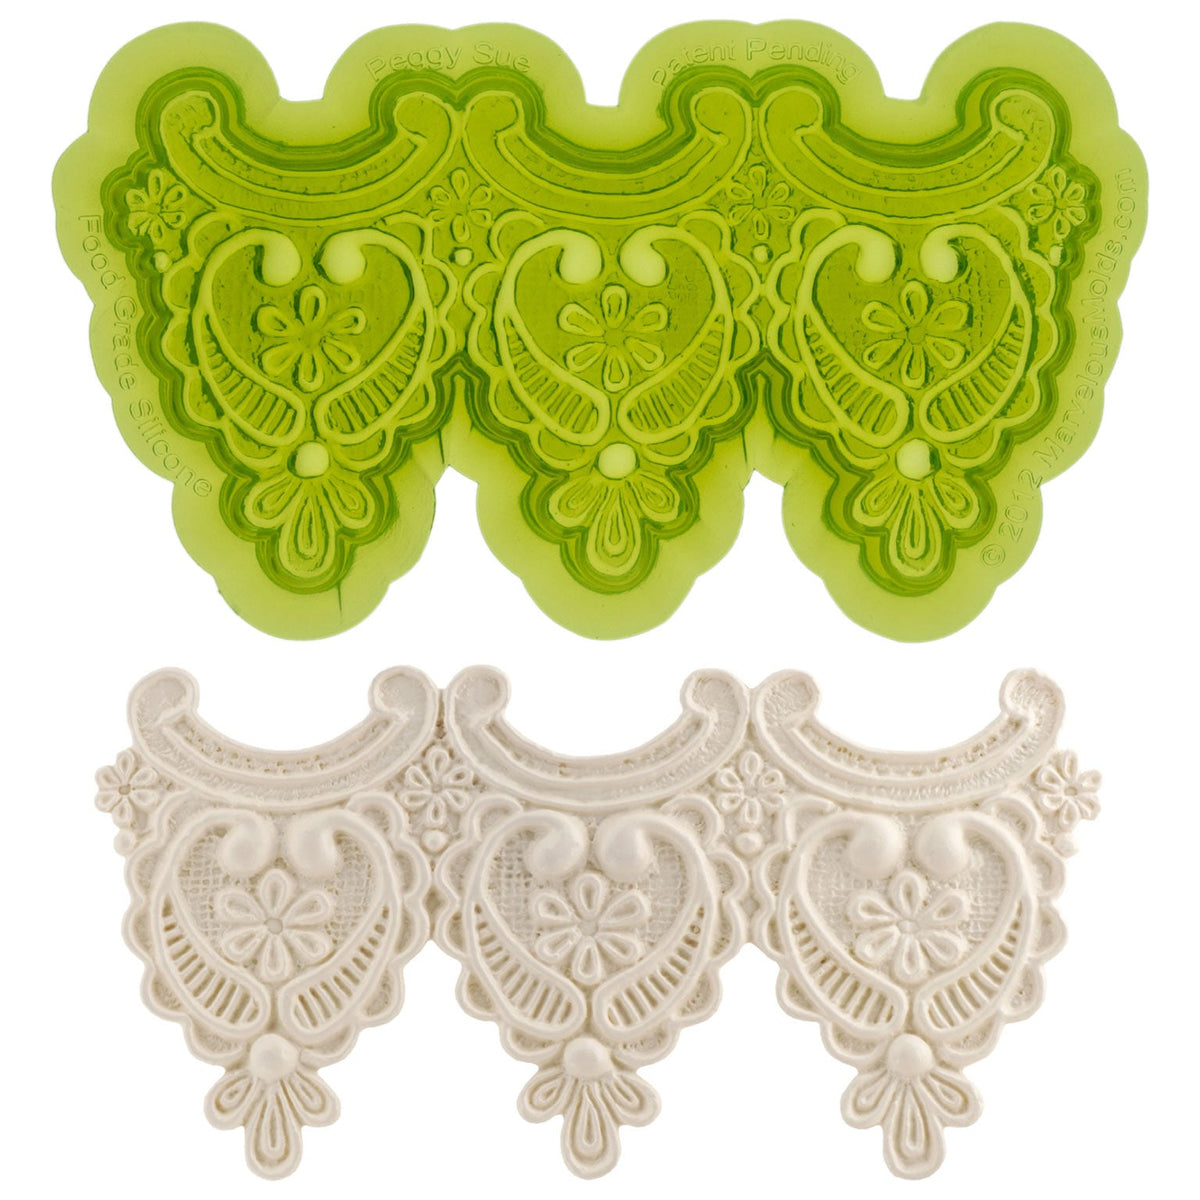 Sue Silicone Lace Mold for Food Safe Fondant Cake Decorating